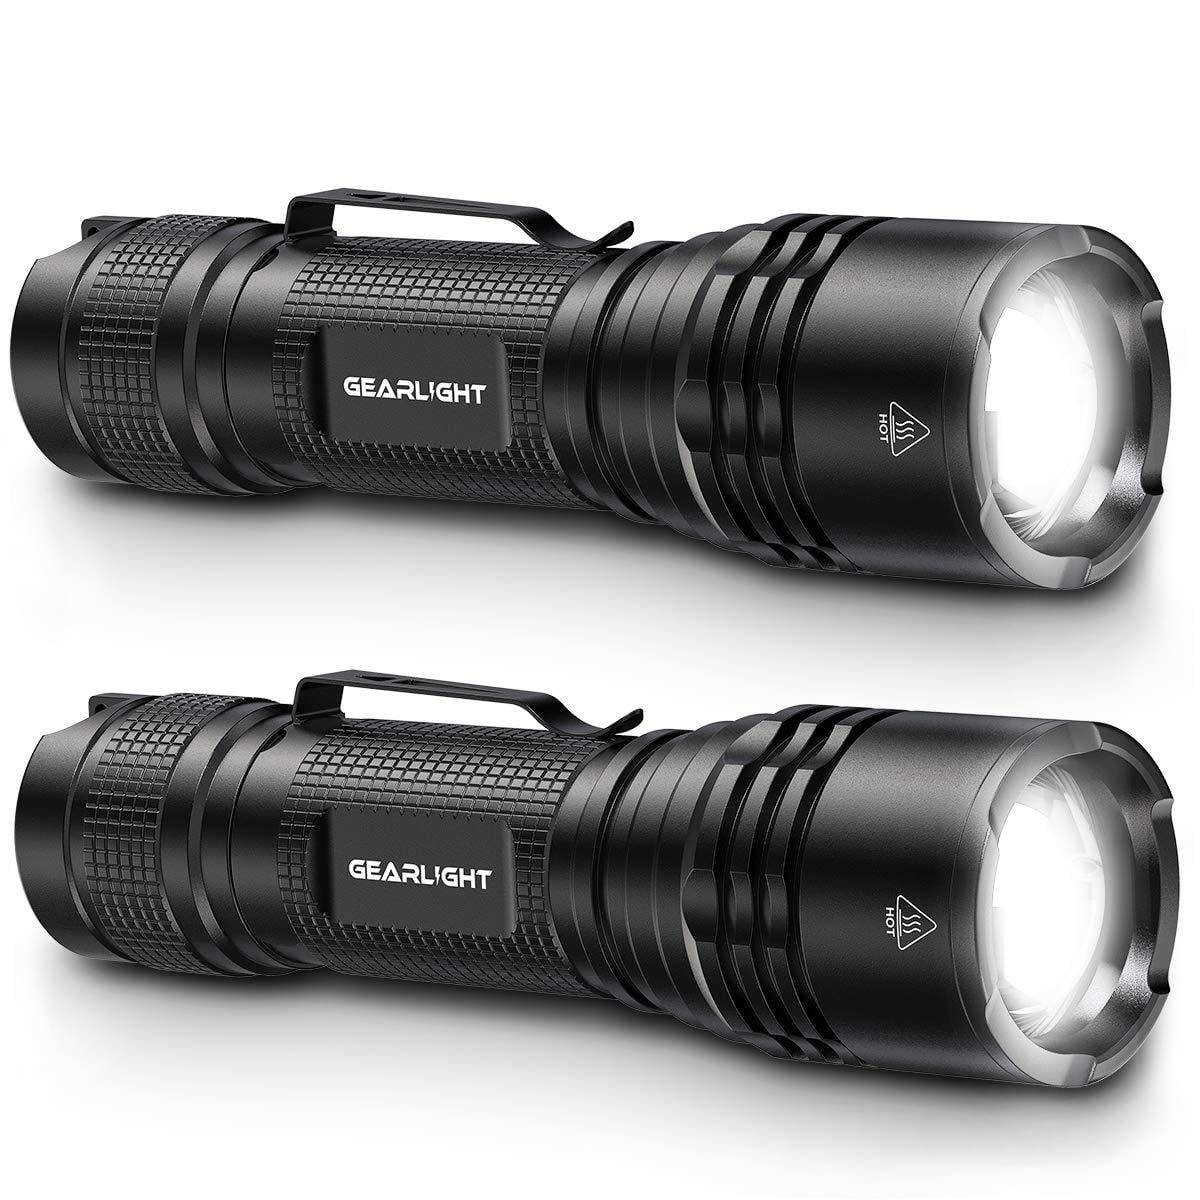 5 Modes High Lumen GearLight LED Tactical Flashlight S1000 with Magnet 2 PACK 